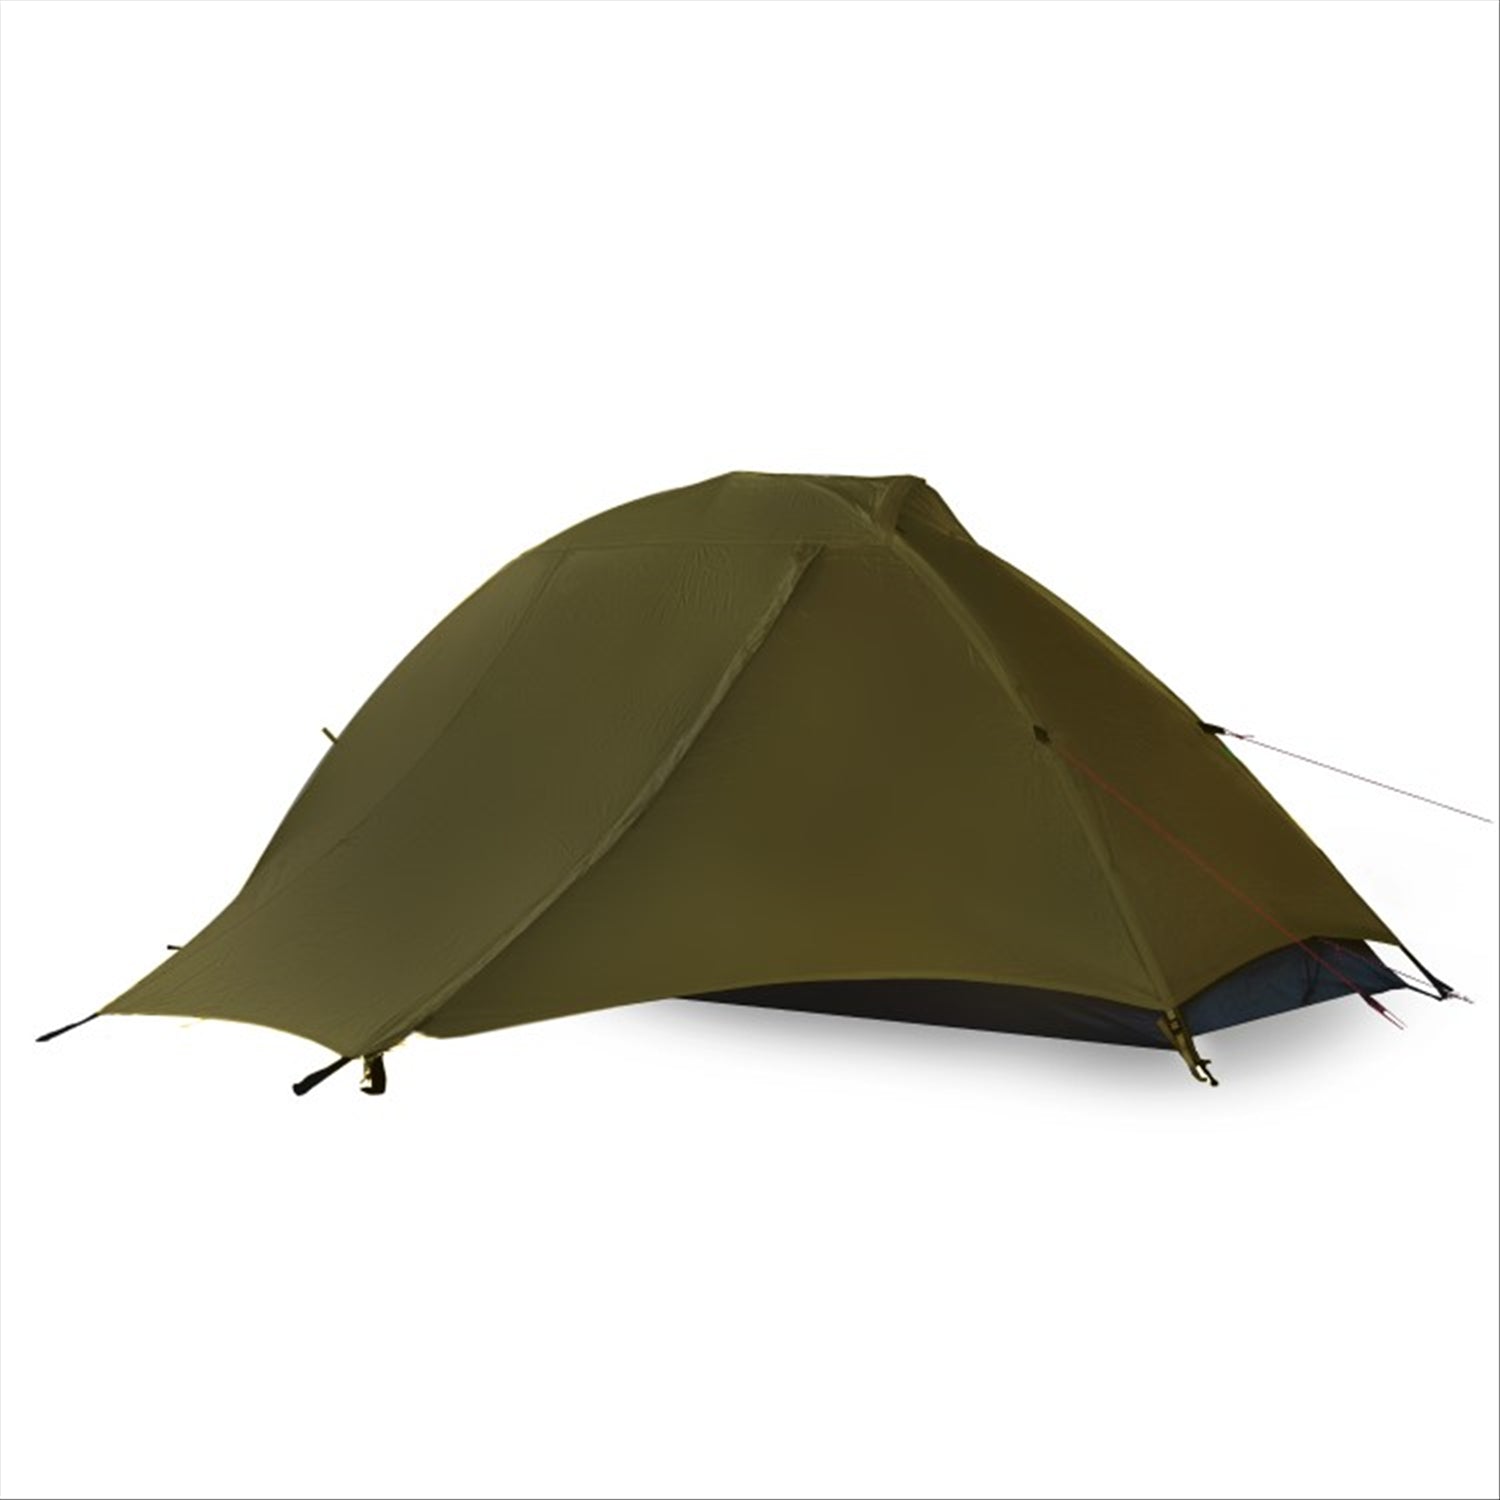 Orson Orson Ace 1 - 'All Weather' Lightweight 1 Person Hiking Tent 2.15kg